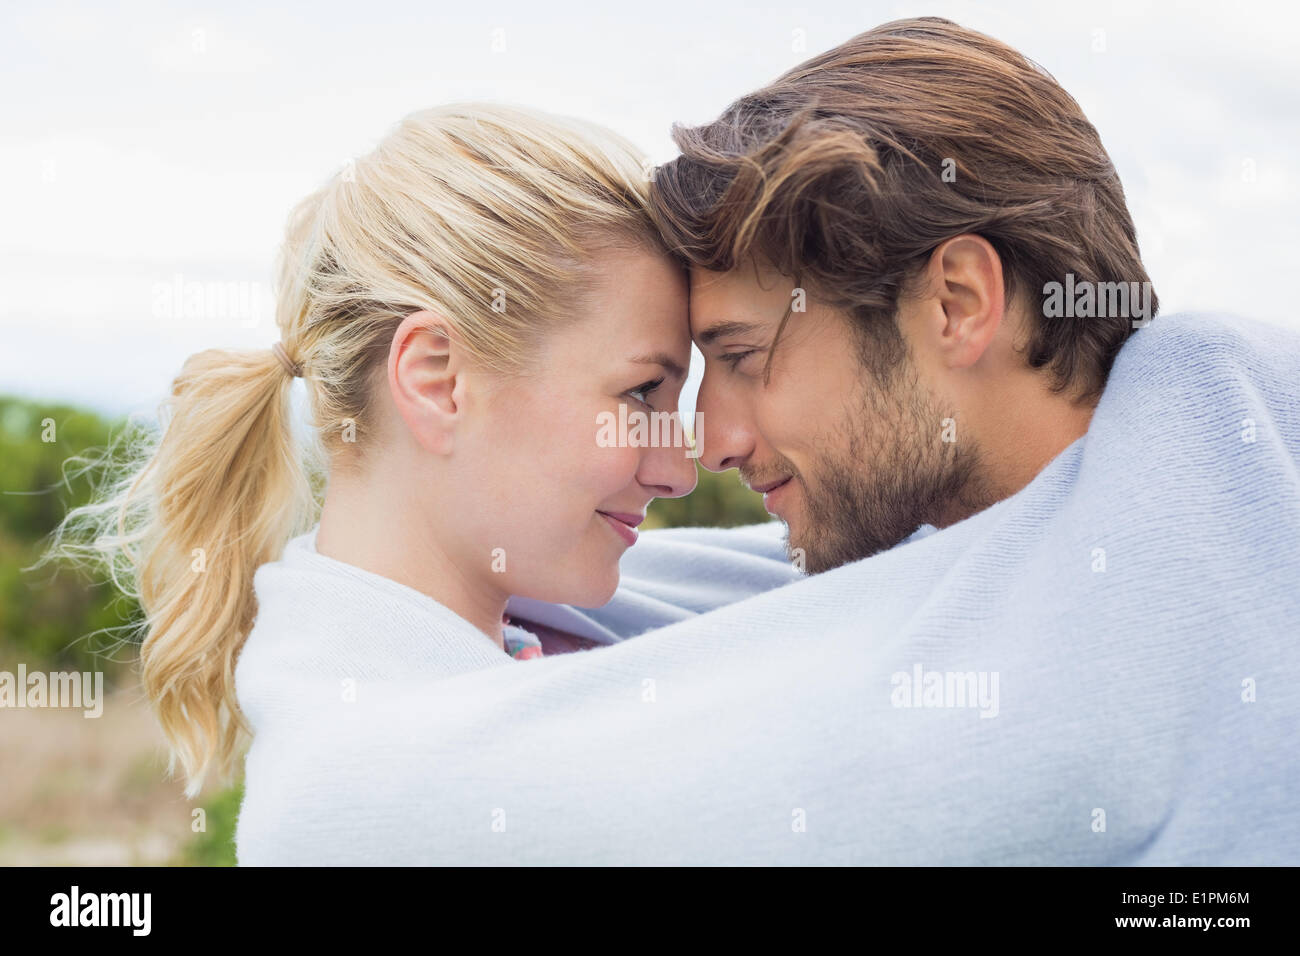 Cute affectionate couple standing outside wrapped in blanket Stock Photo